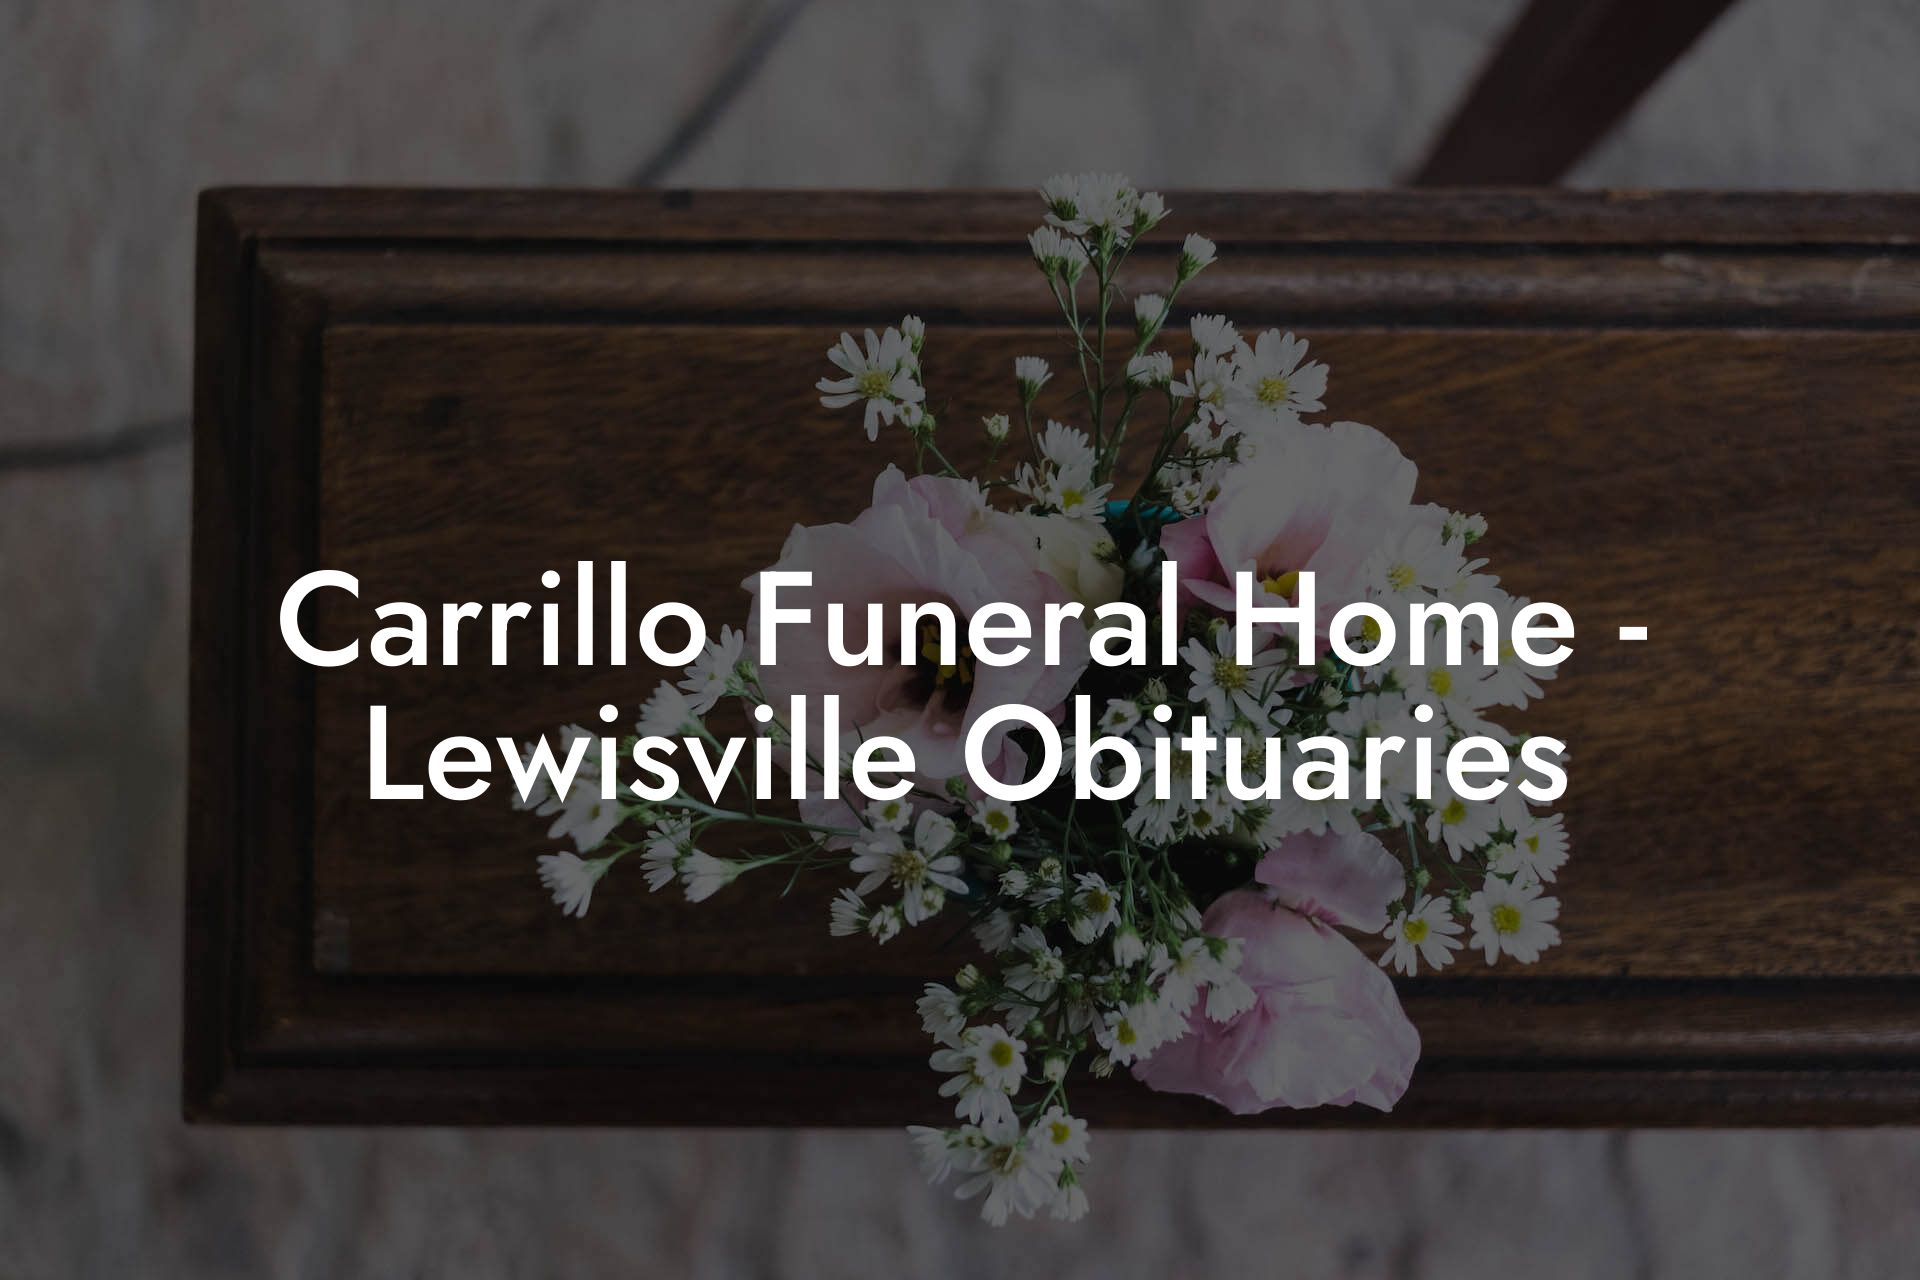 Carrillo Funeral Home - Lewisville Obituaries